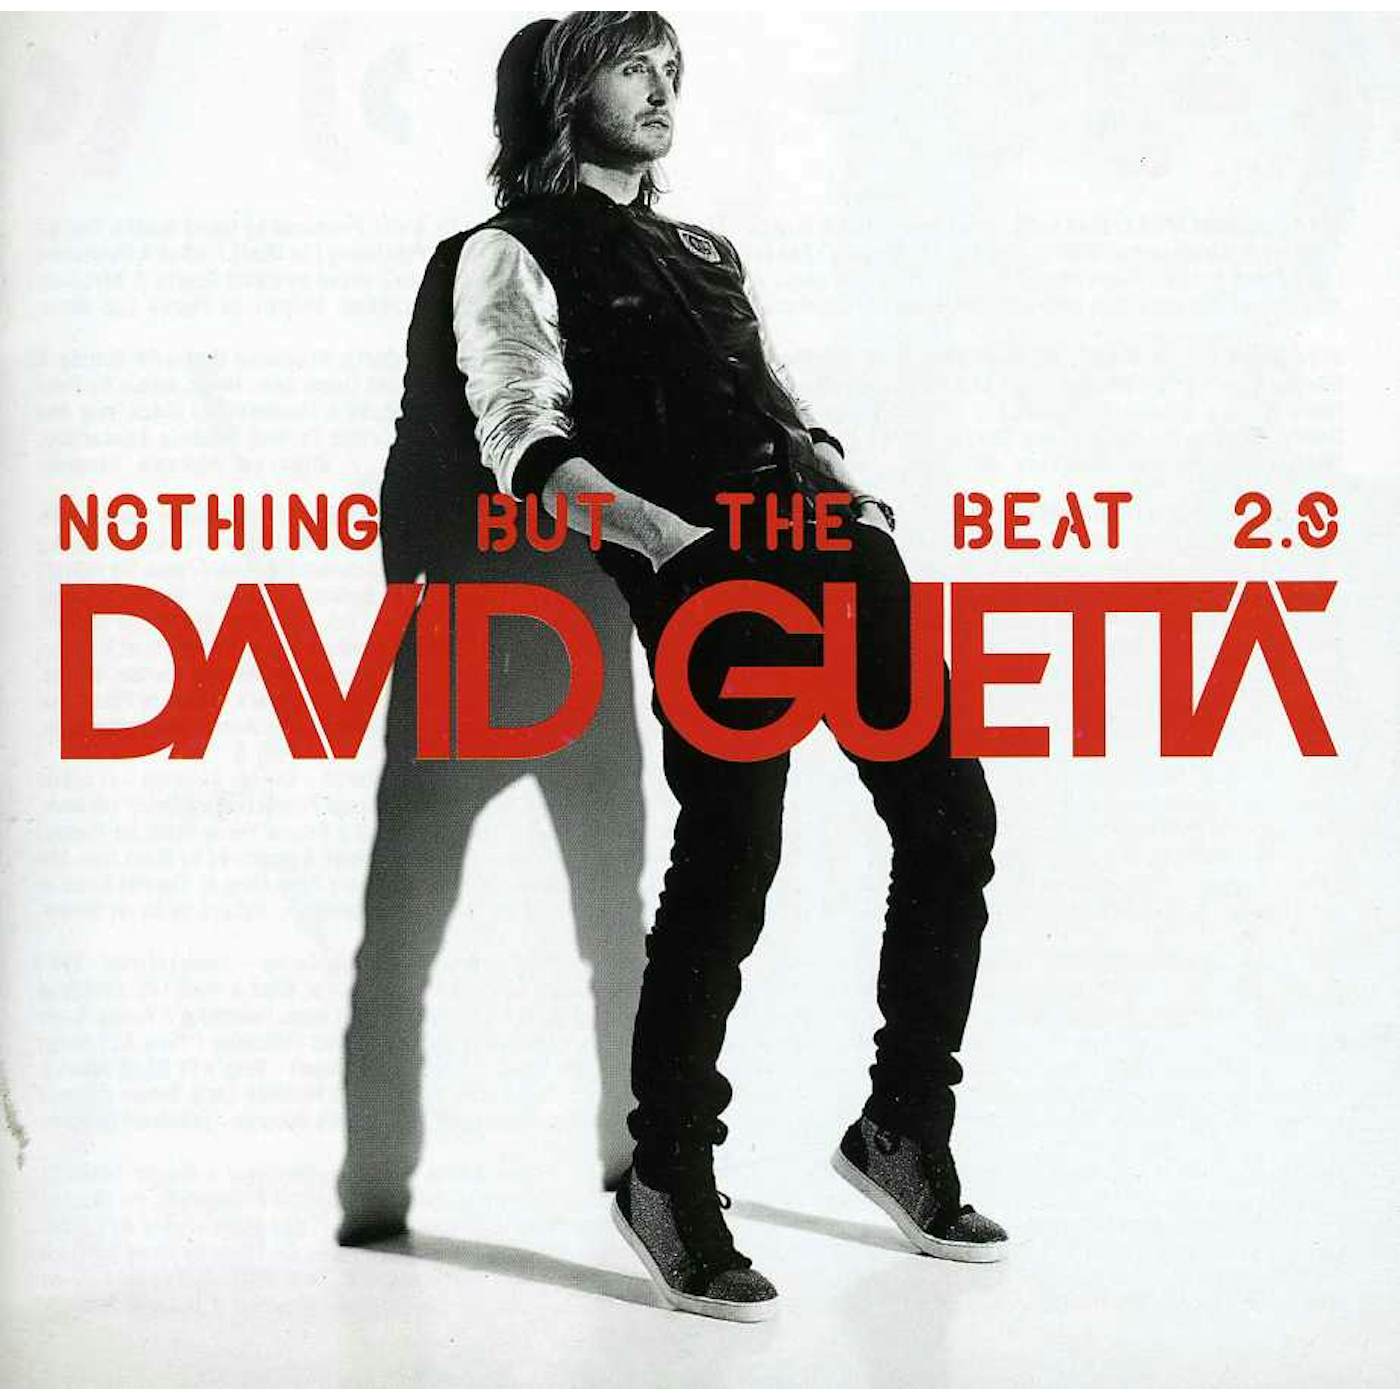 David Guetta NOTHING BUT THE BEAT 2.0 CD